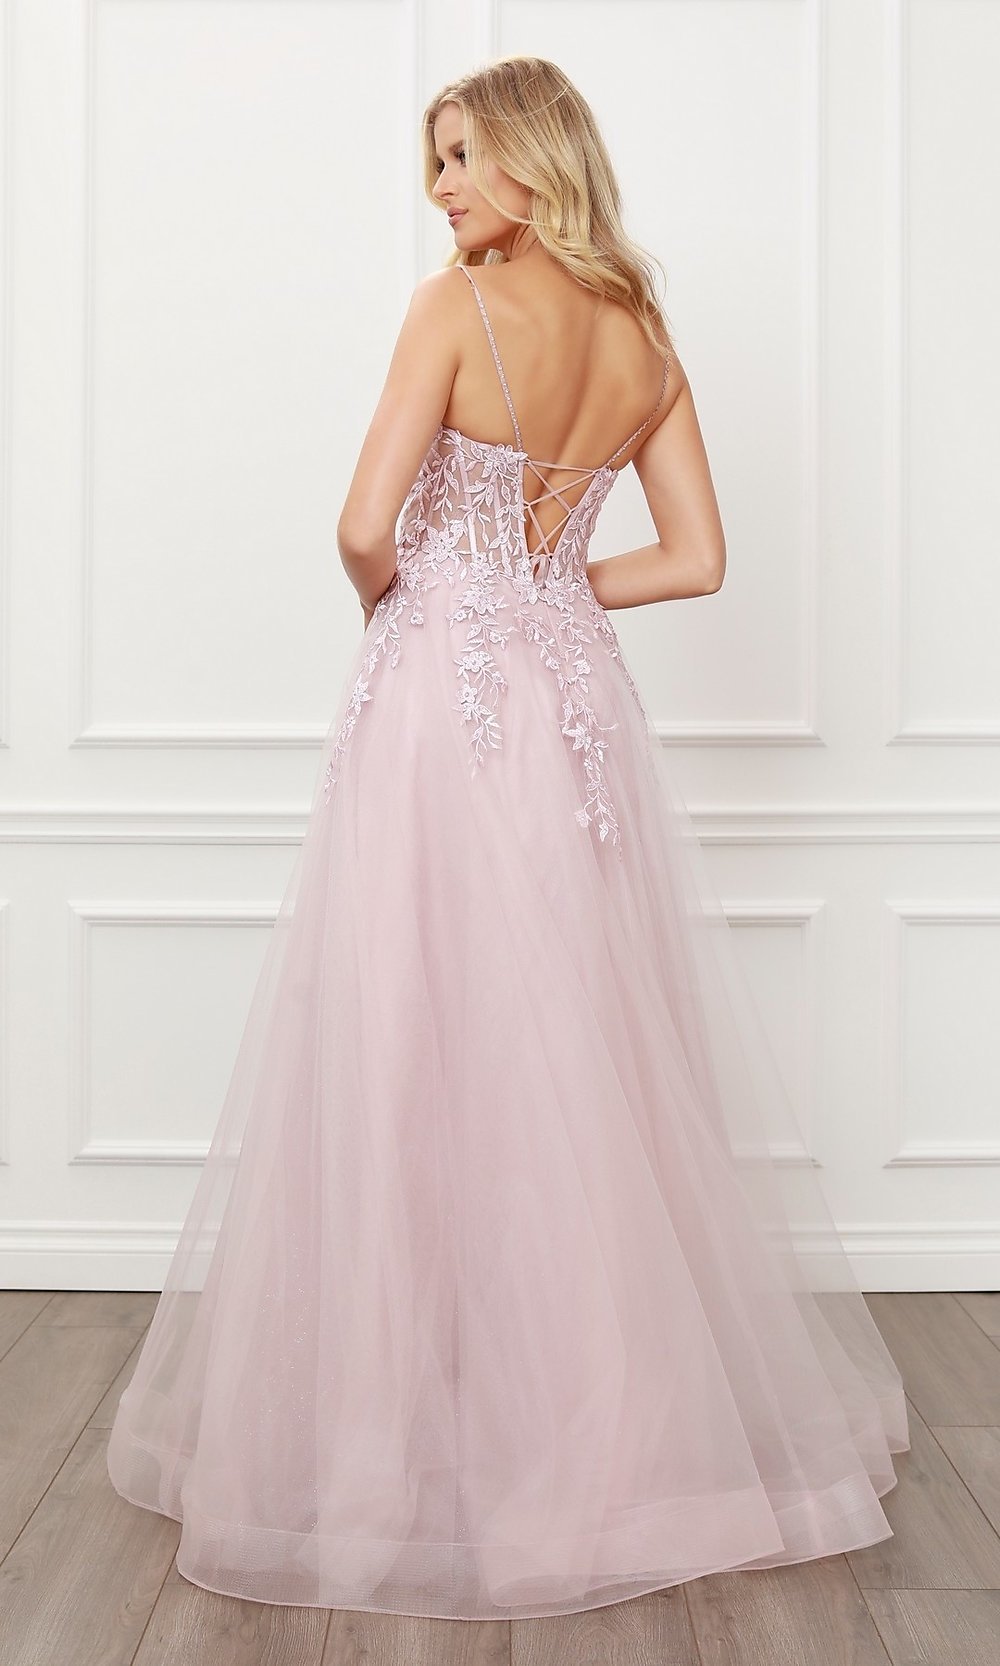 Sparkly Purple Prom Dress with Pockets Strapless Ball Gown FD2833 –  Viniodress